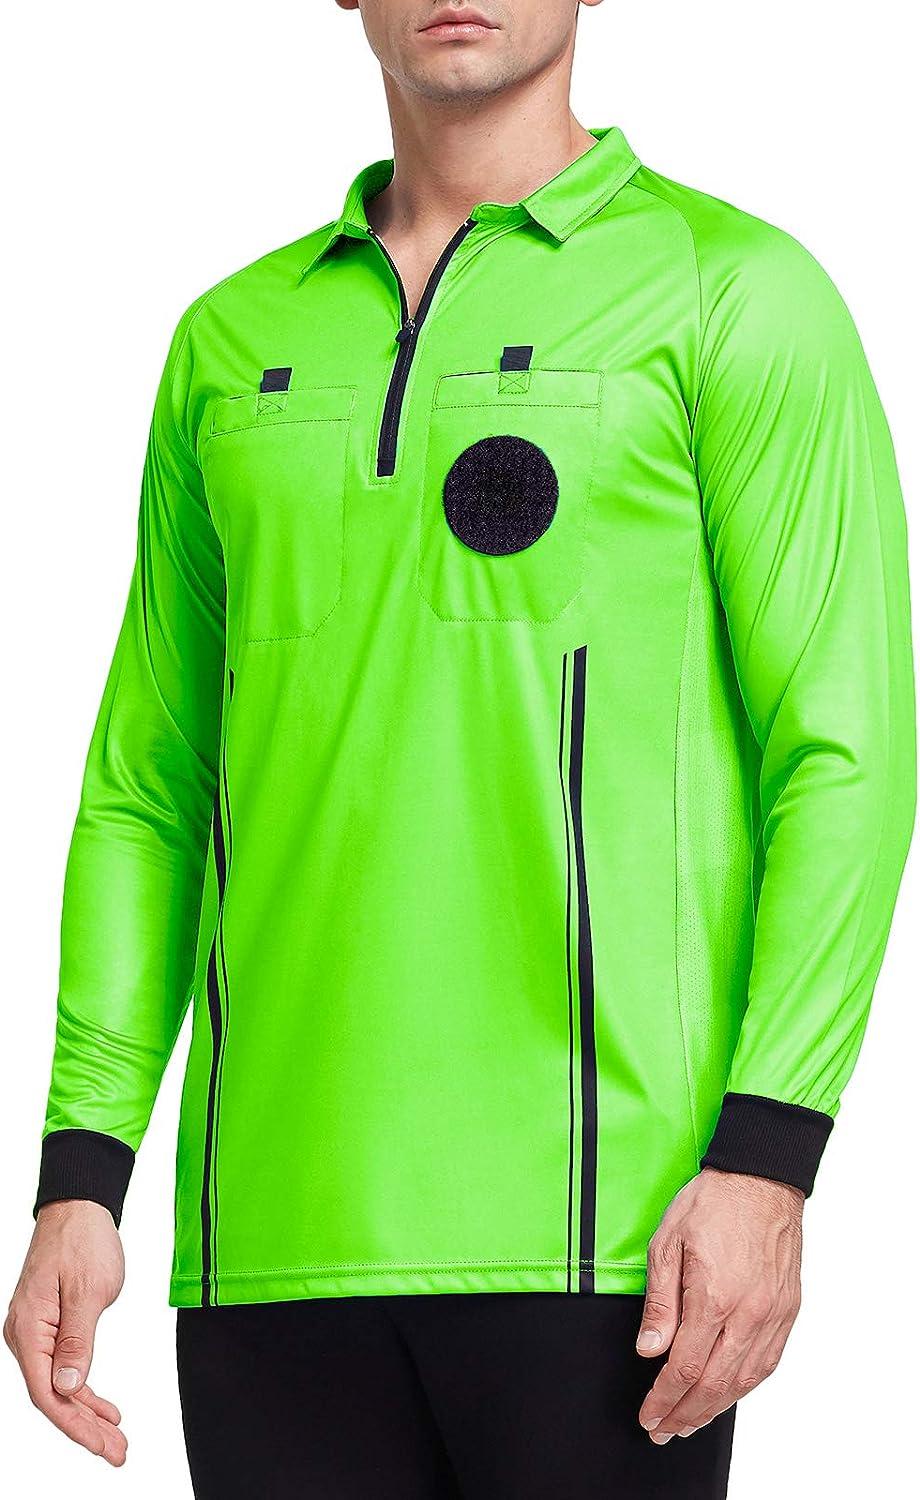 Buy FitsT4 Pro Soccer Referee Jersey Short Sleeve Ref Shirts at